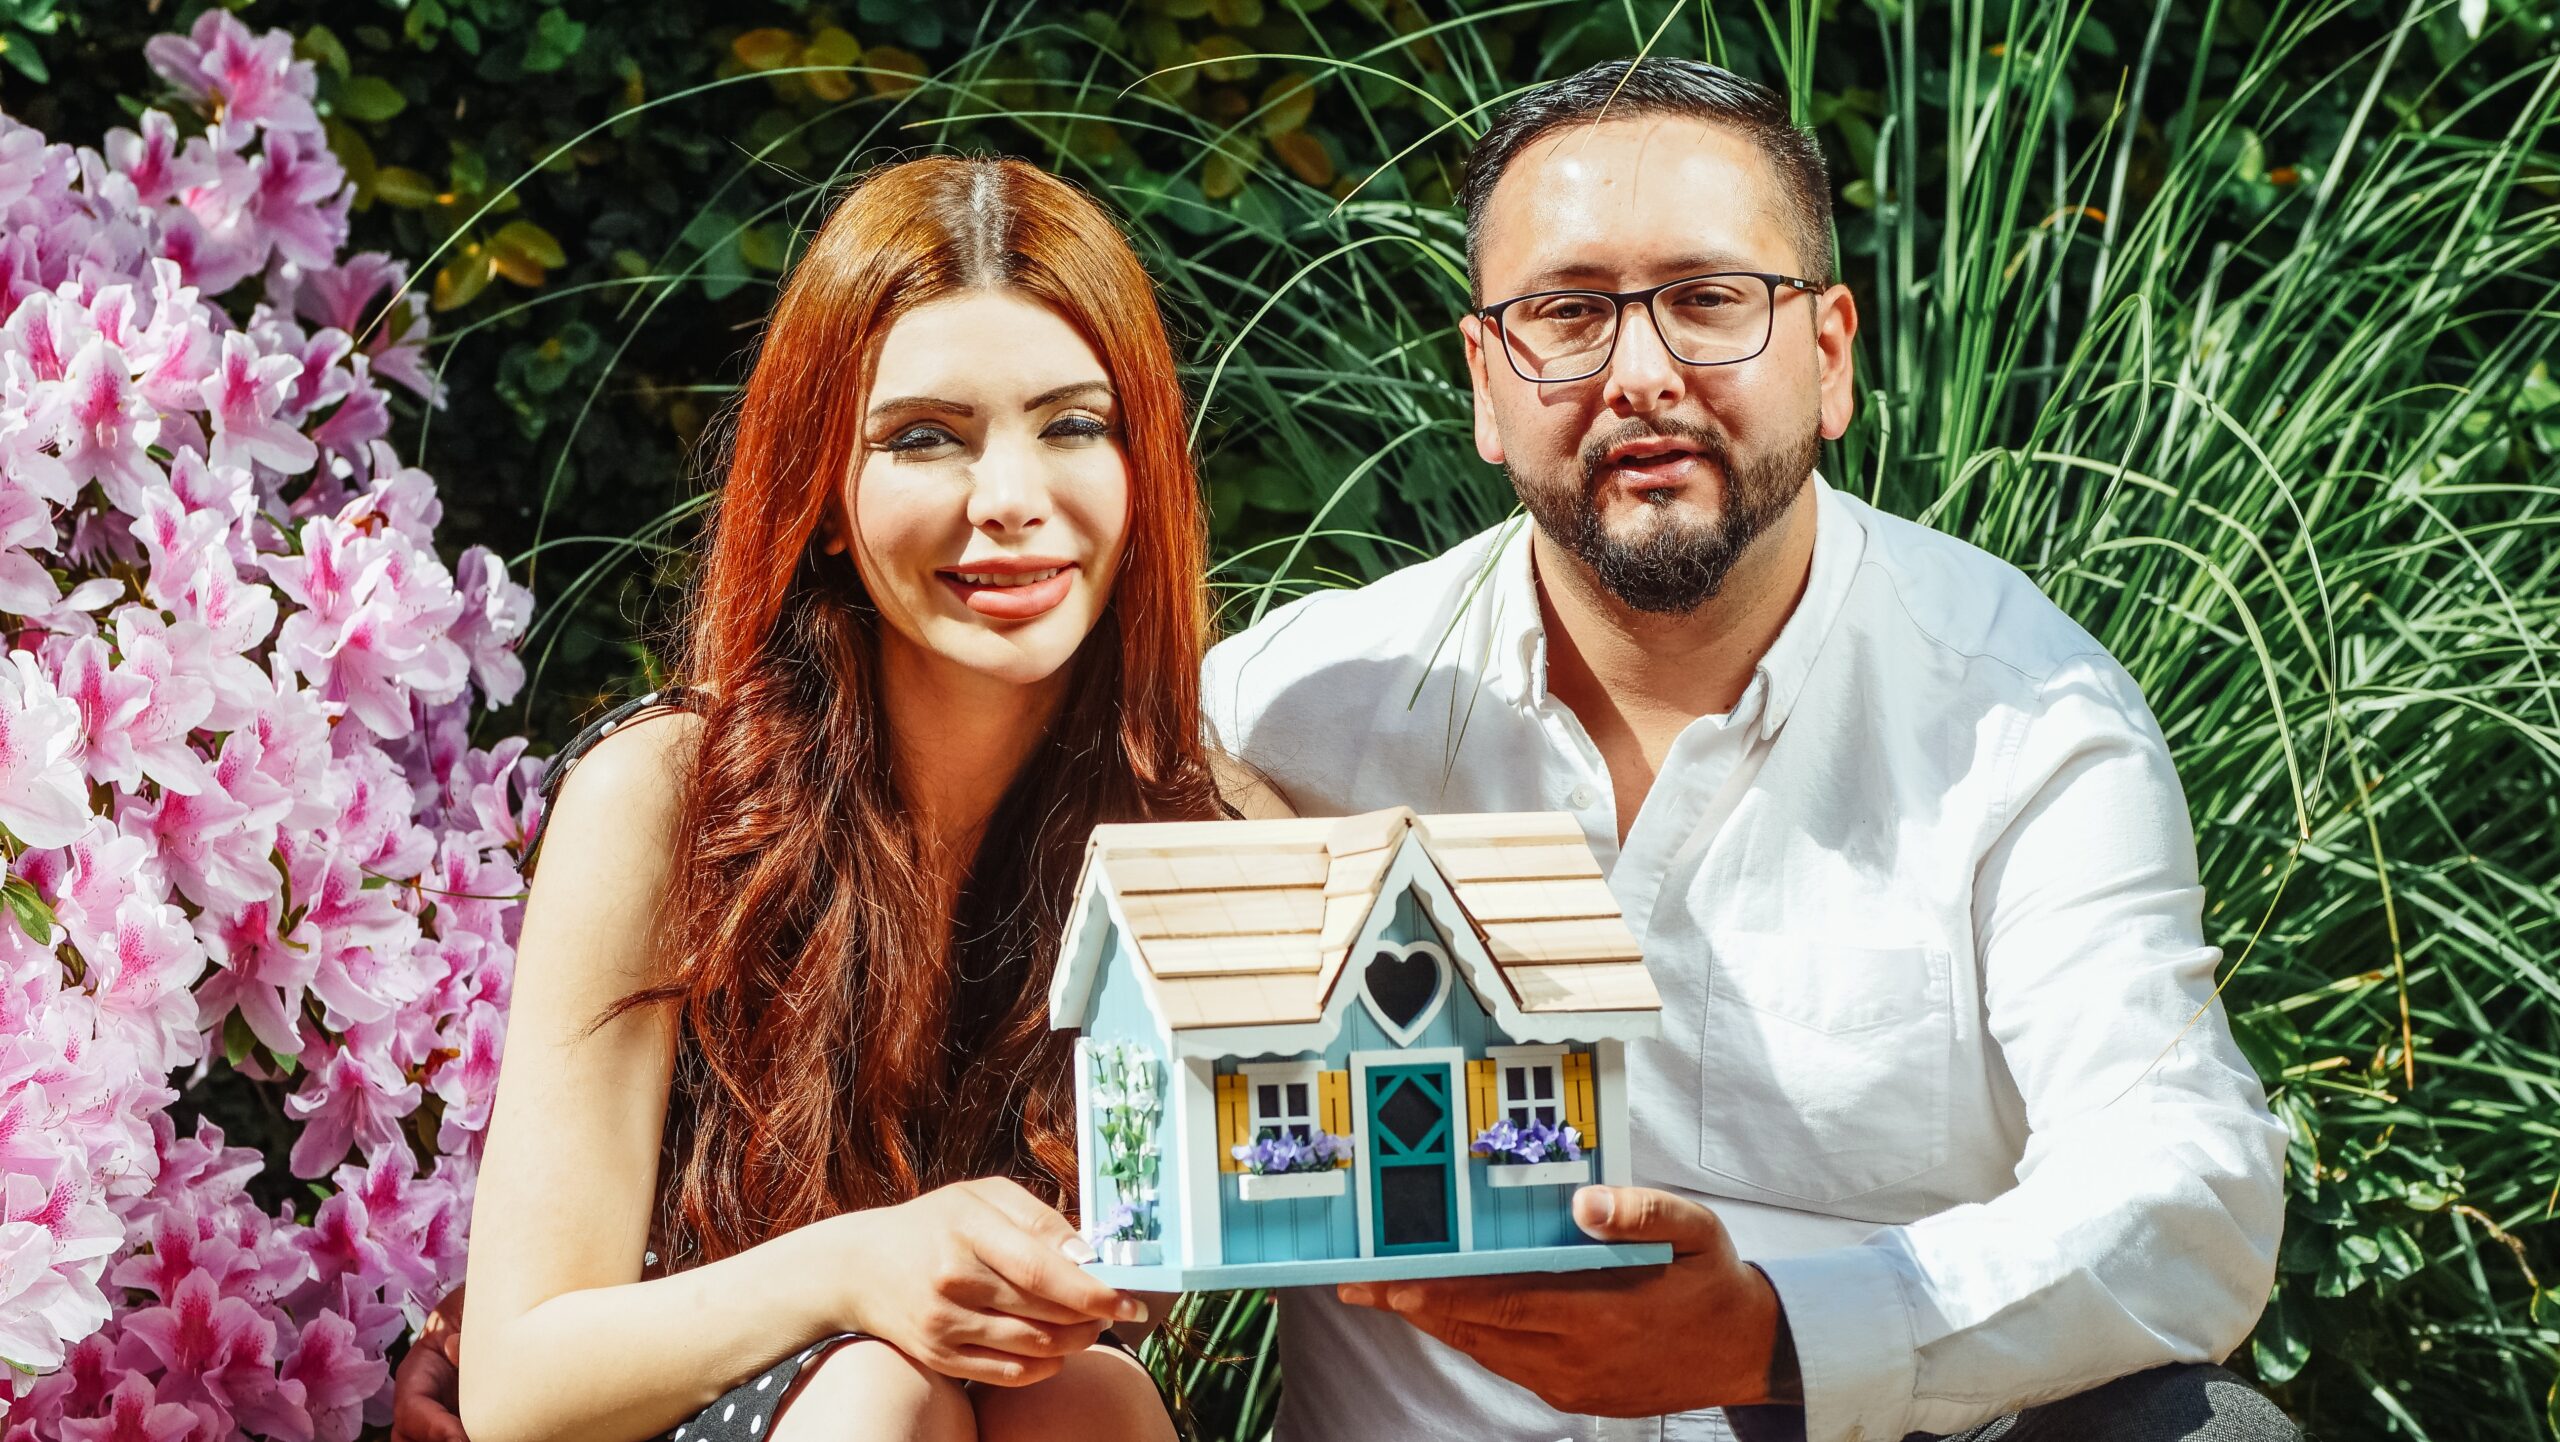 New Homeowners: Don’t Compromise on Home Insurance!